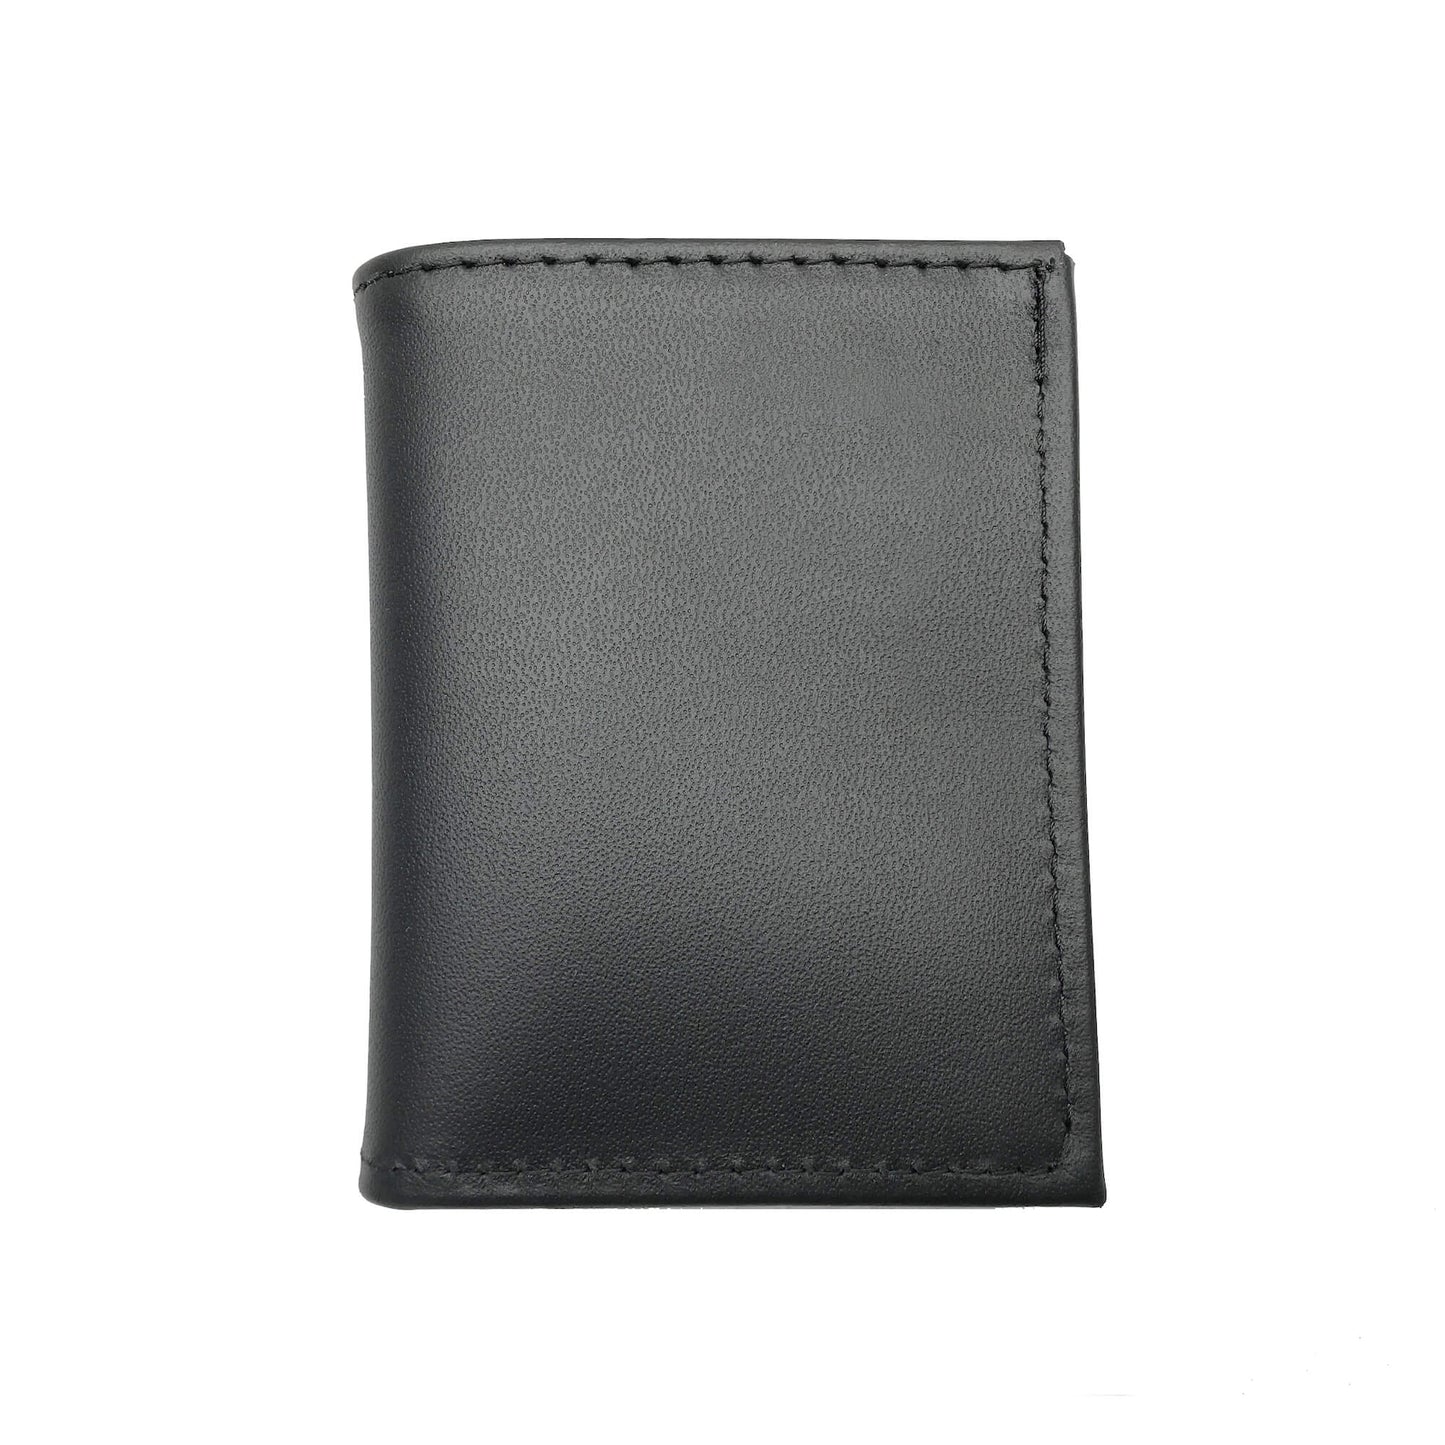 New York Police Department (NYPD) Chief-Inspector Bifold Hidden Badge Wallet-Perfect Fit-911 Duty Gear USA